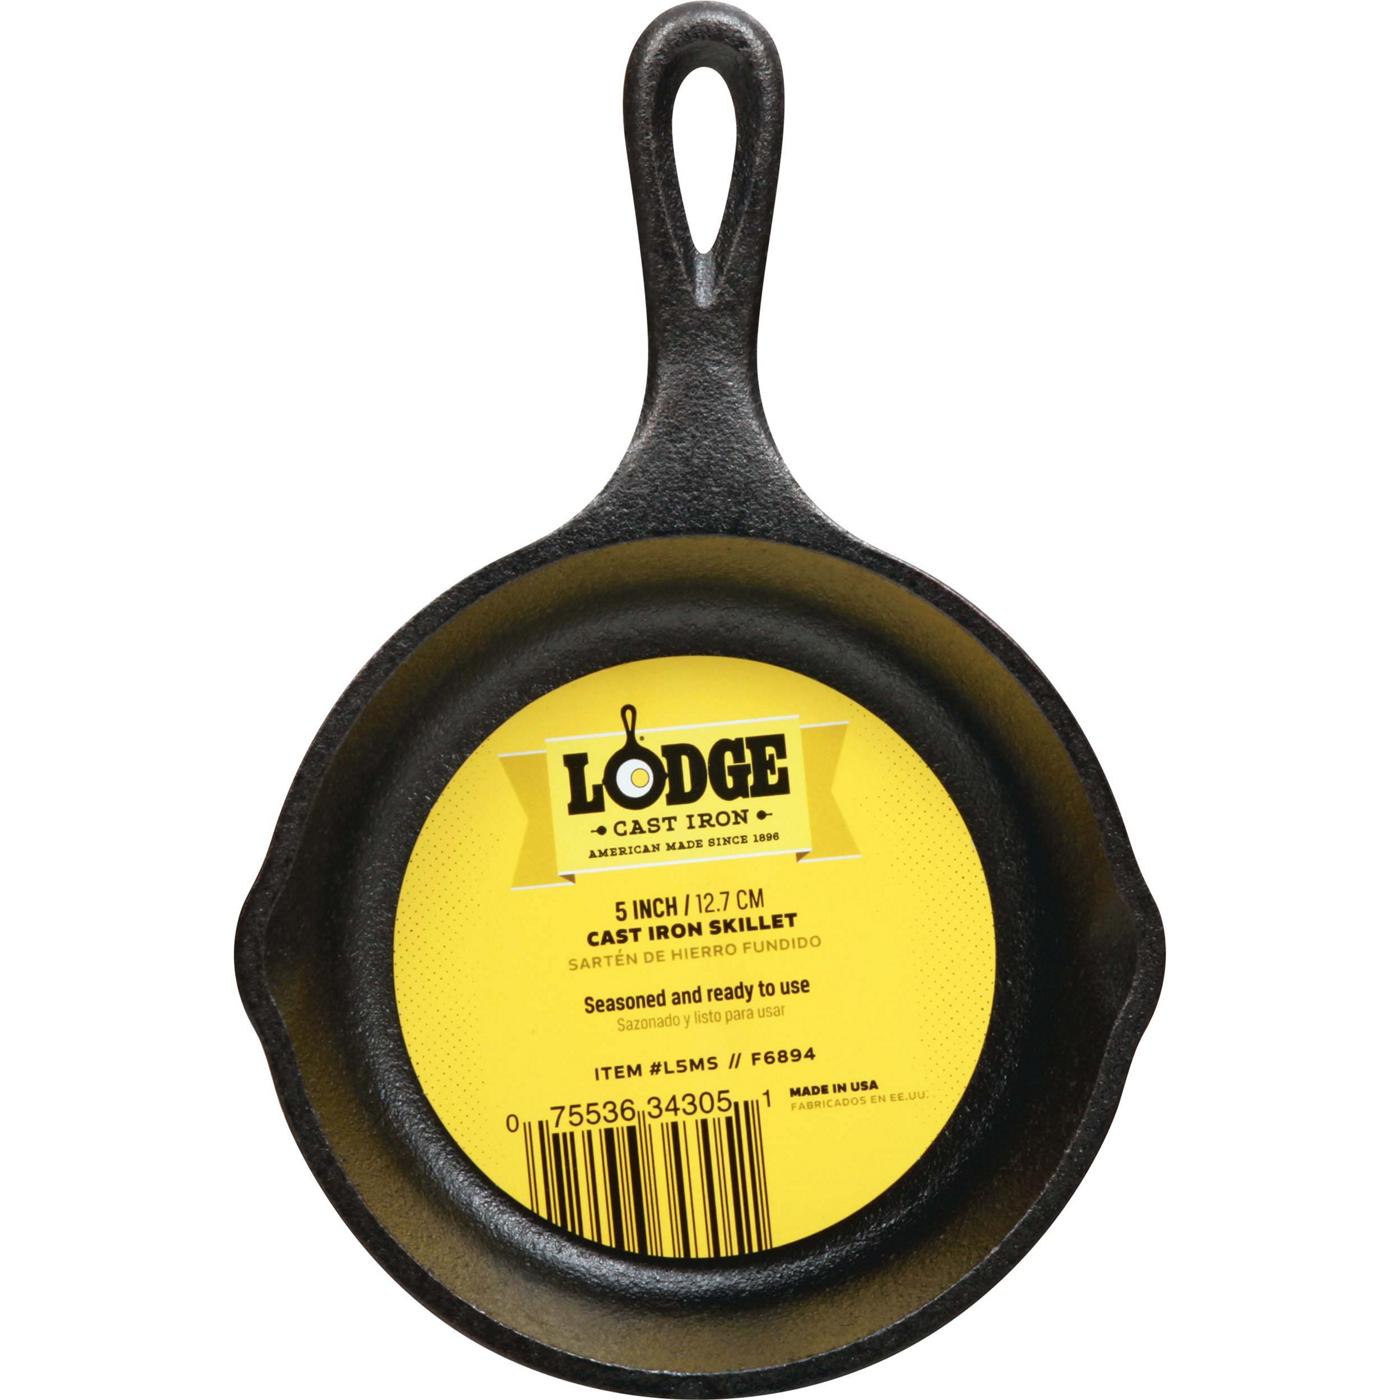 American Made Cast Iron Skillets